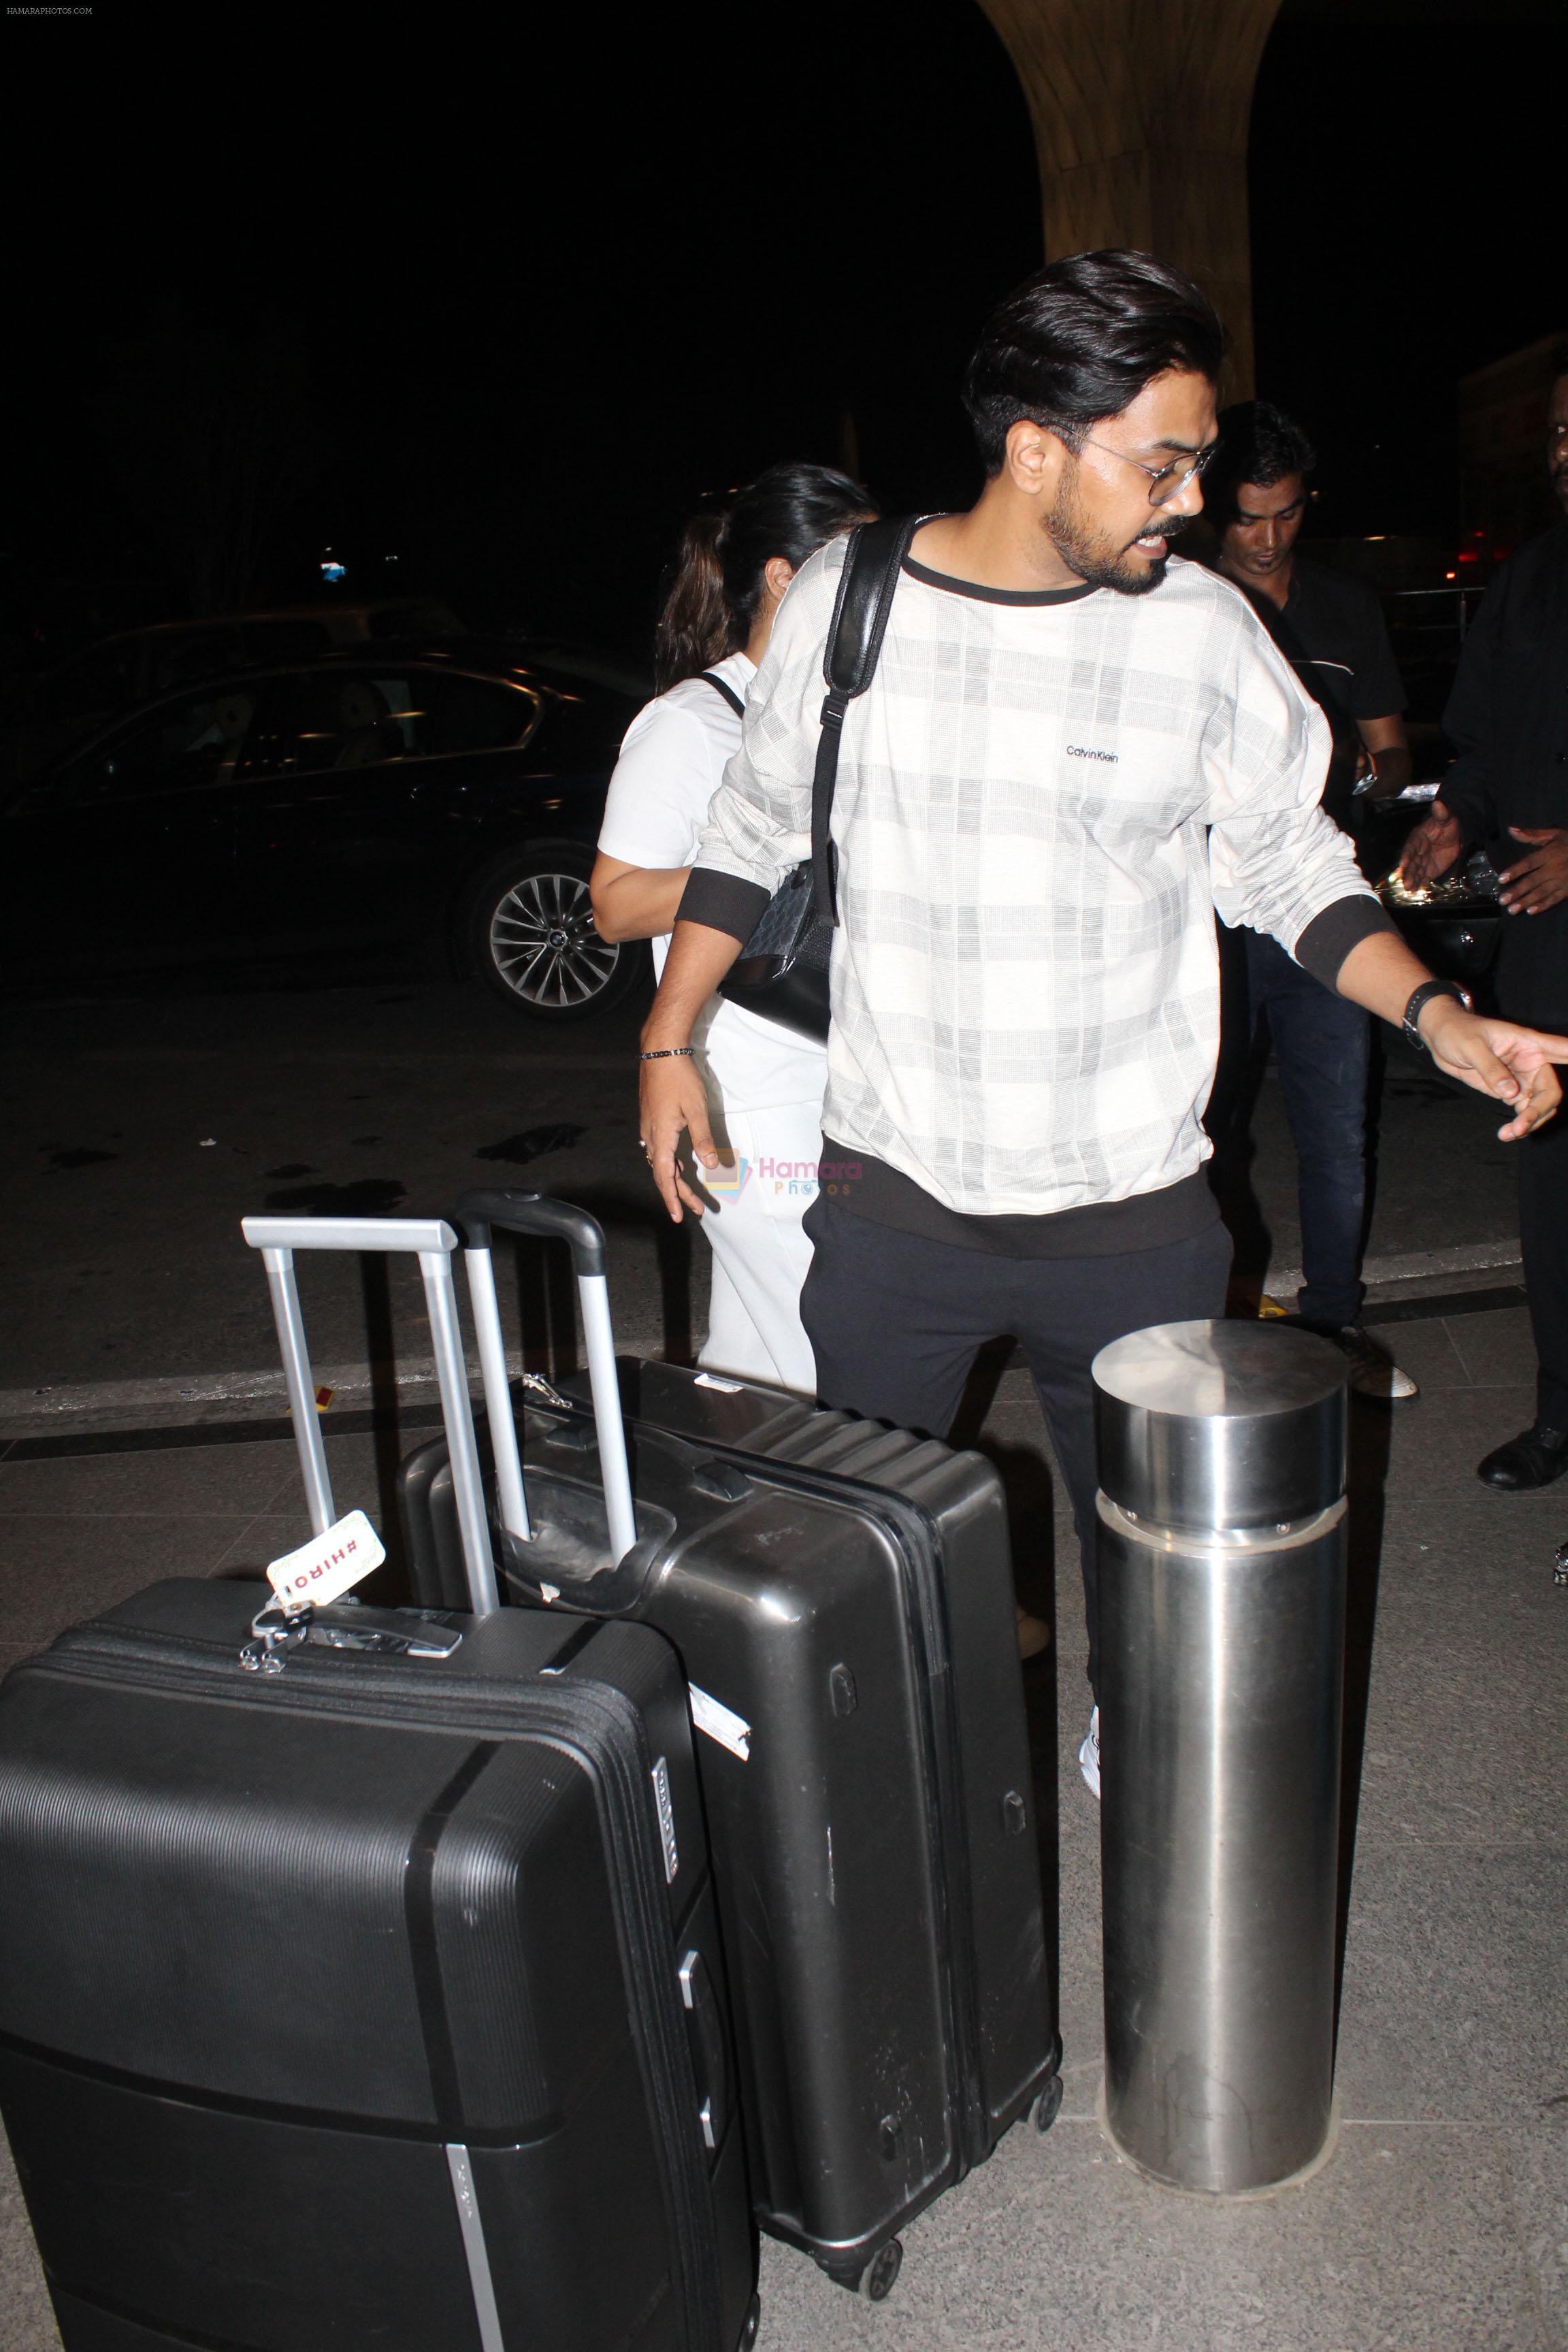 Hina Khan with her beau Rocky Jaiswal at the airport on 15 Jun 2023